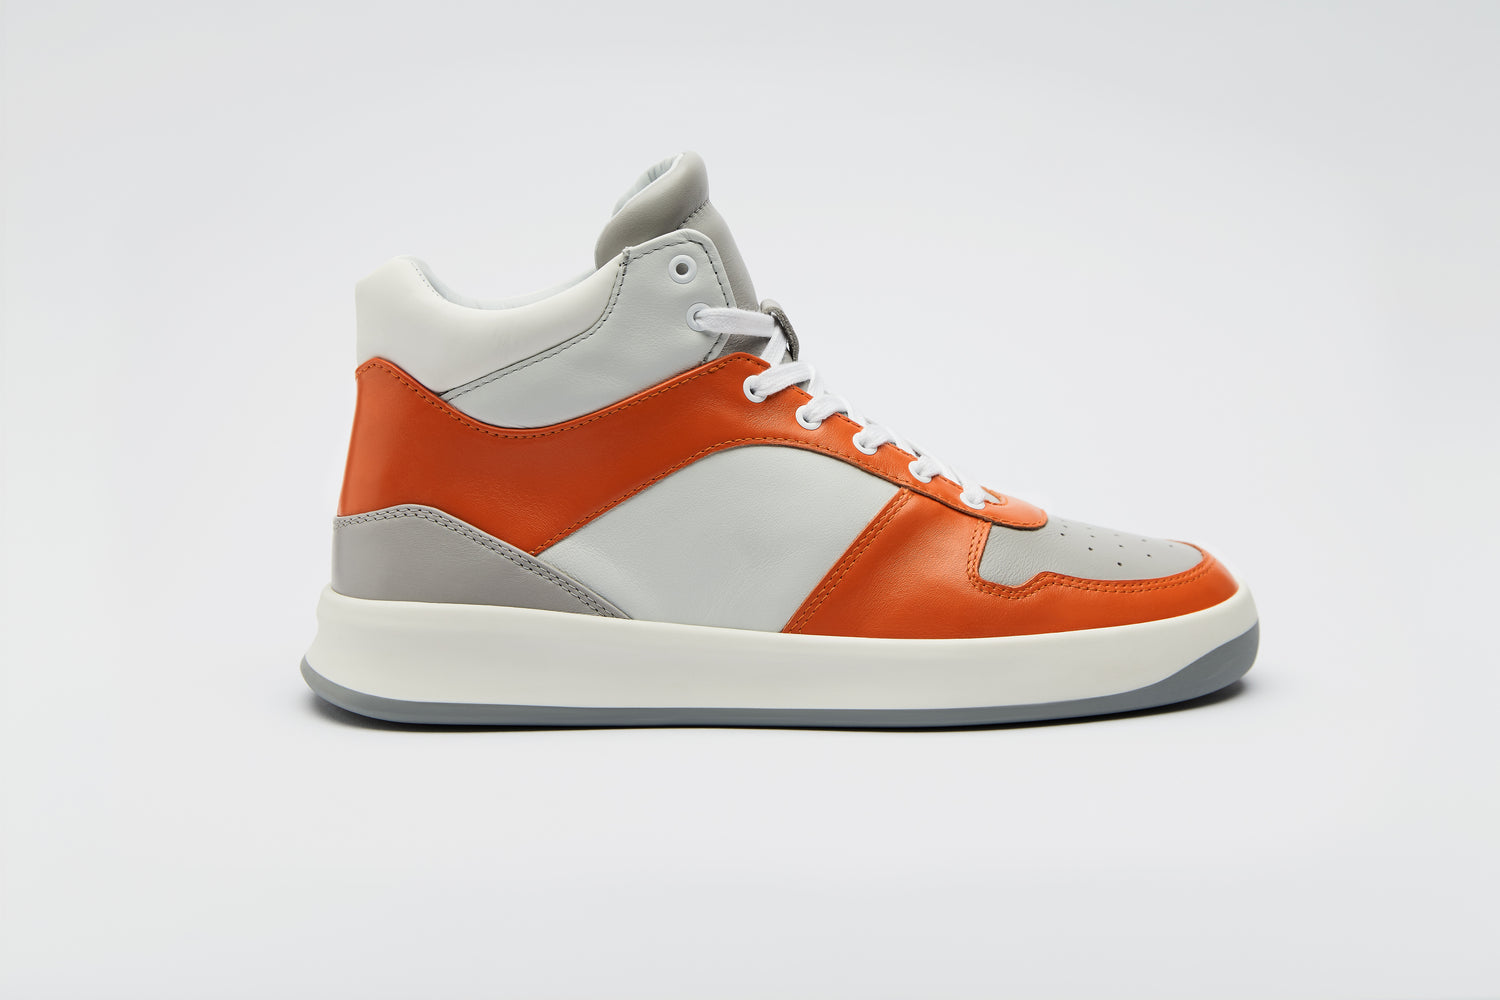 Vibrant Orange and white high-top sneaker, made with premium materials.